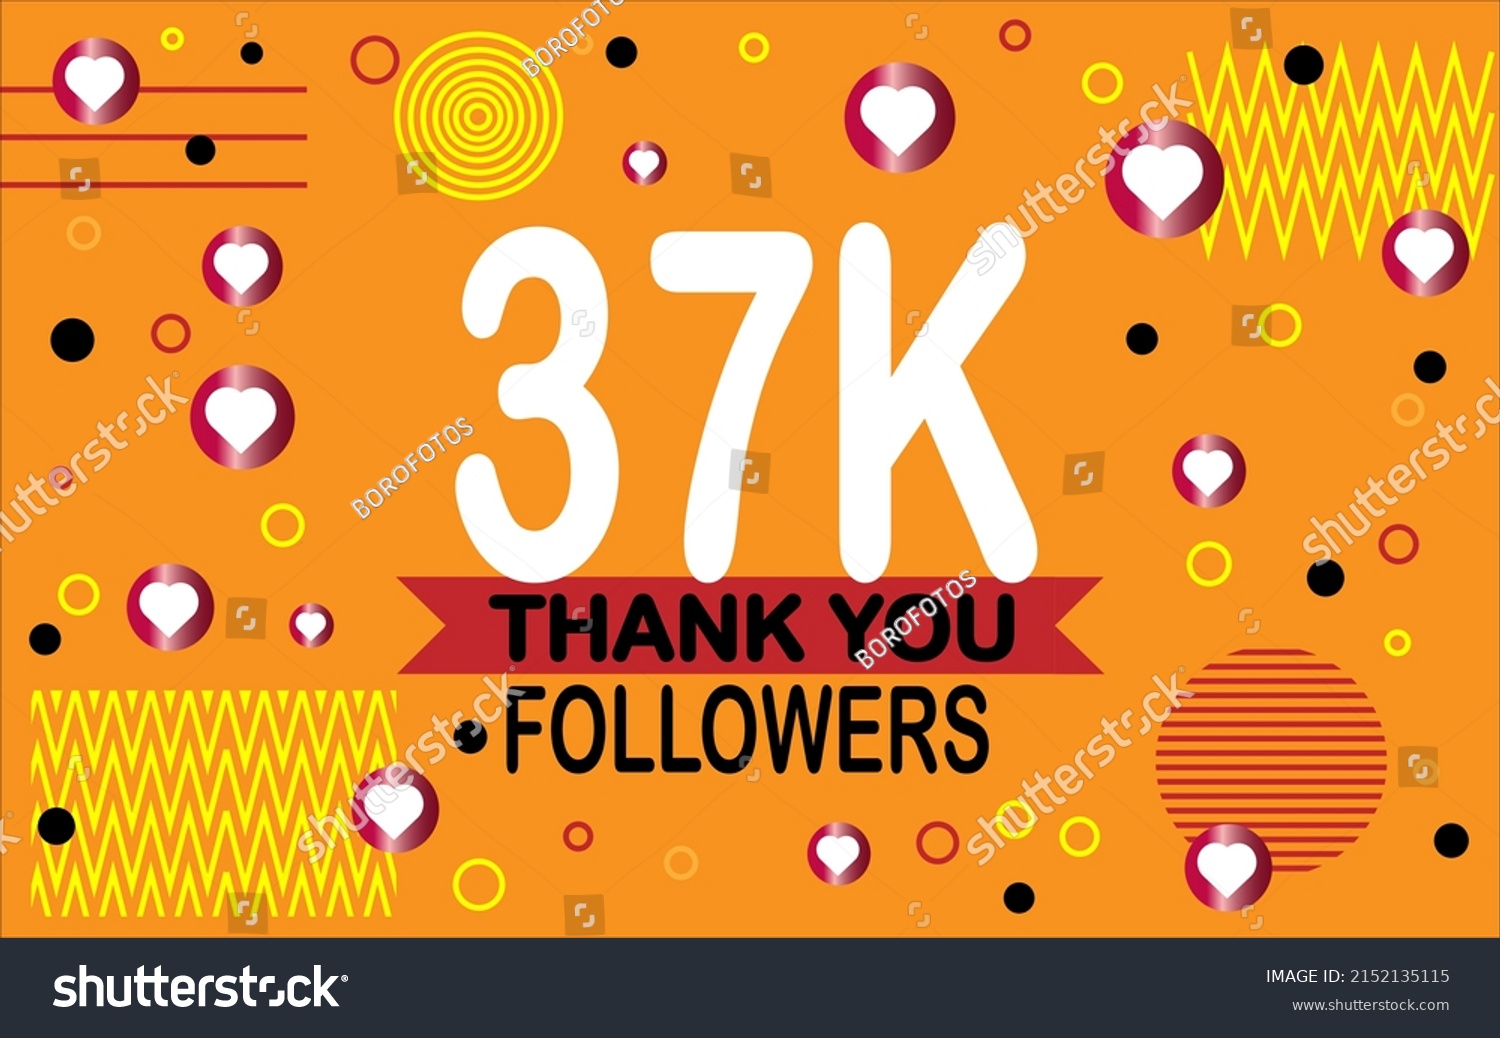 SVG of Thank you 37000 followers. Congratulation colorful image for net friends social. svg